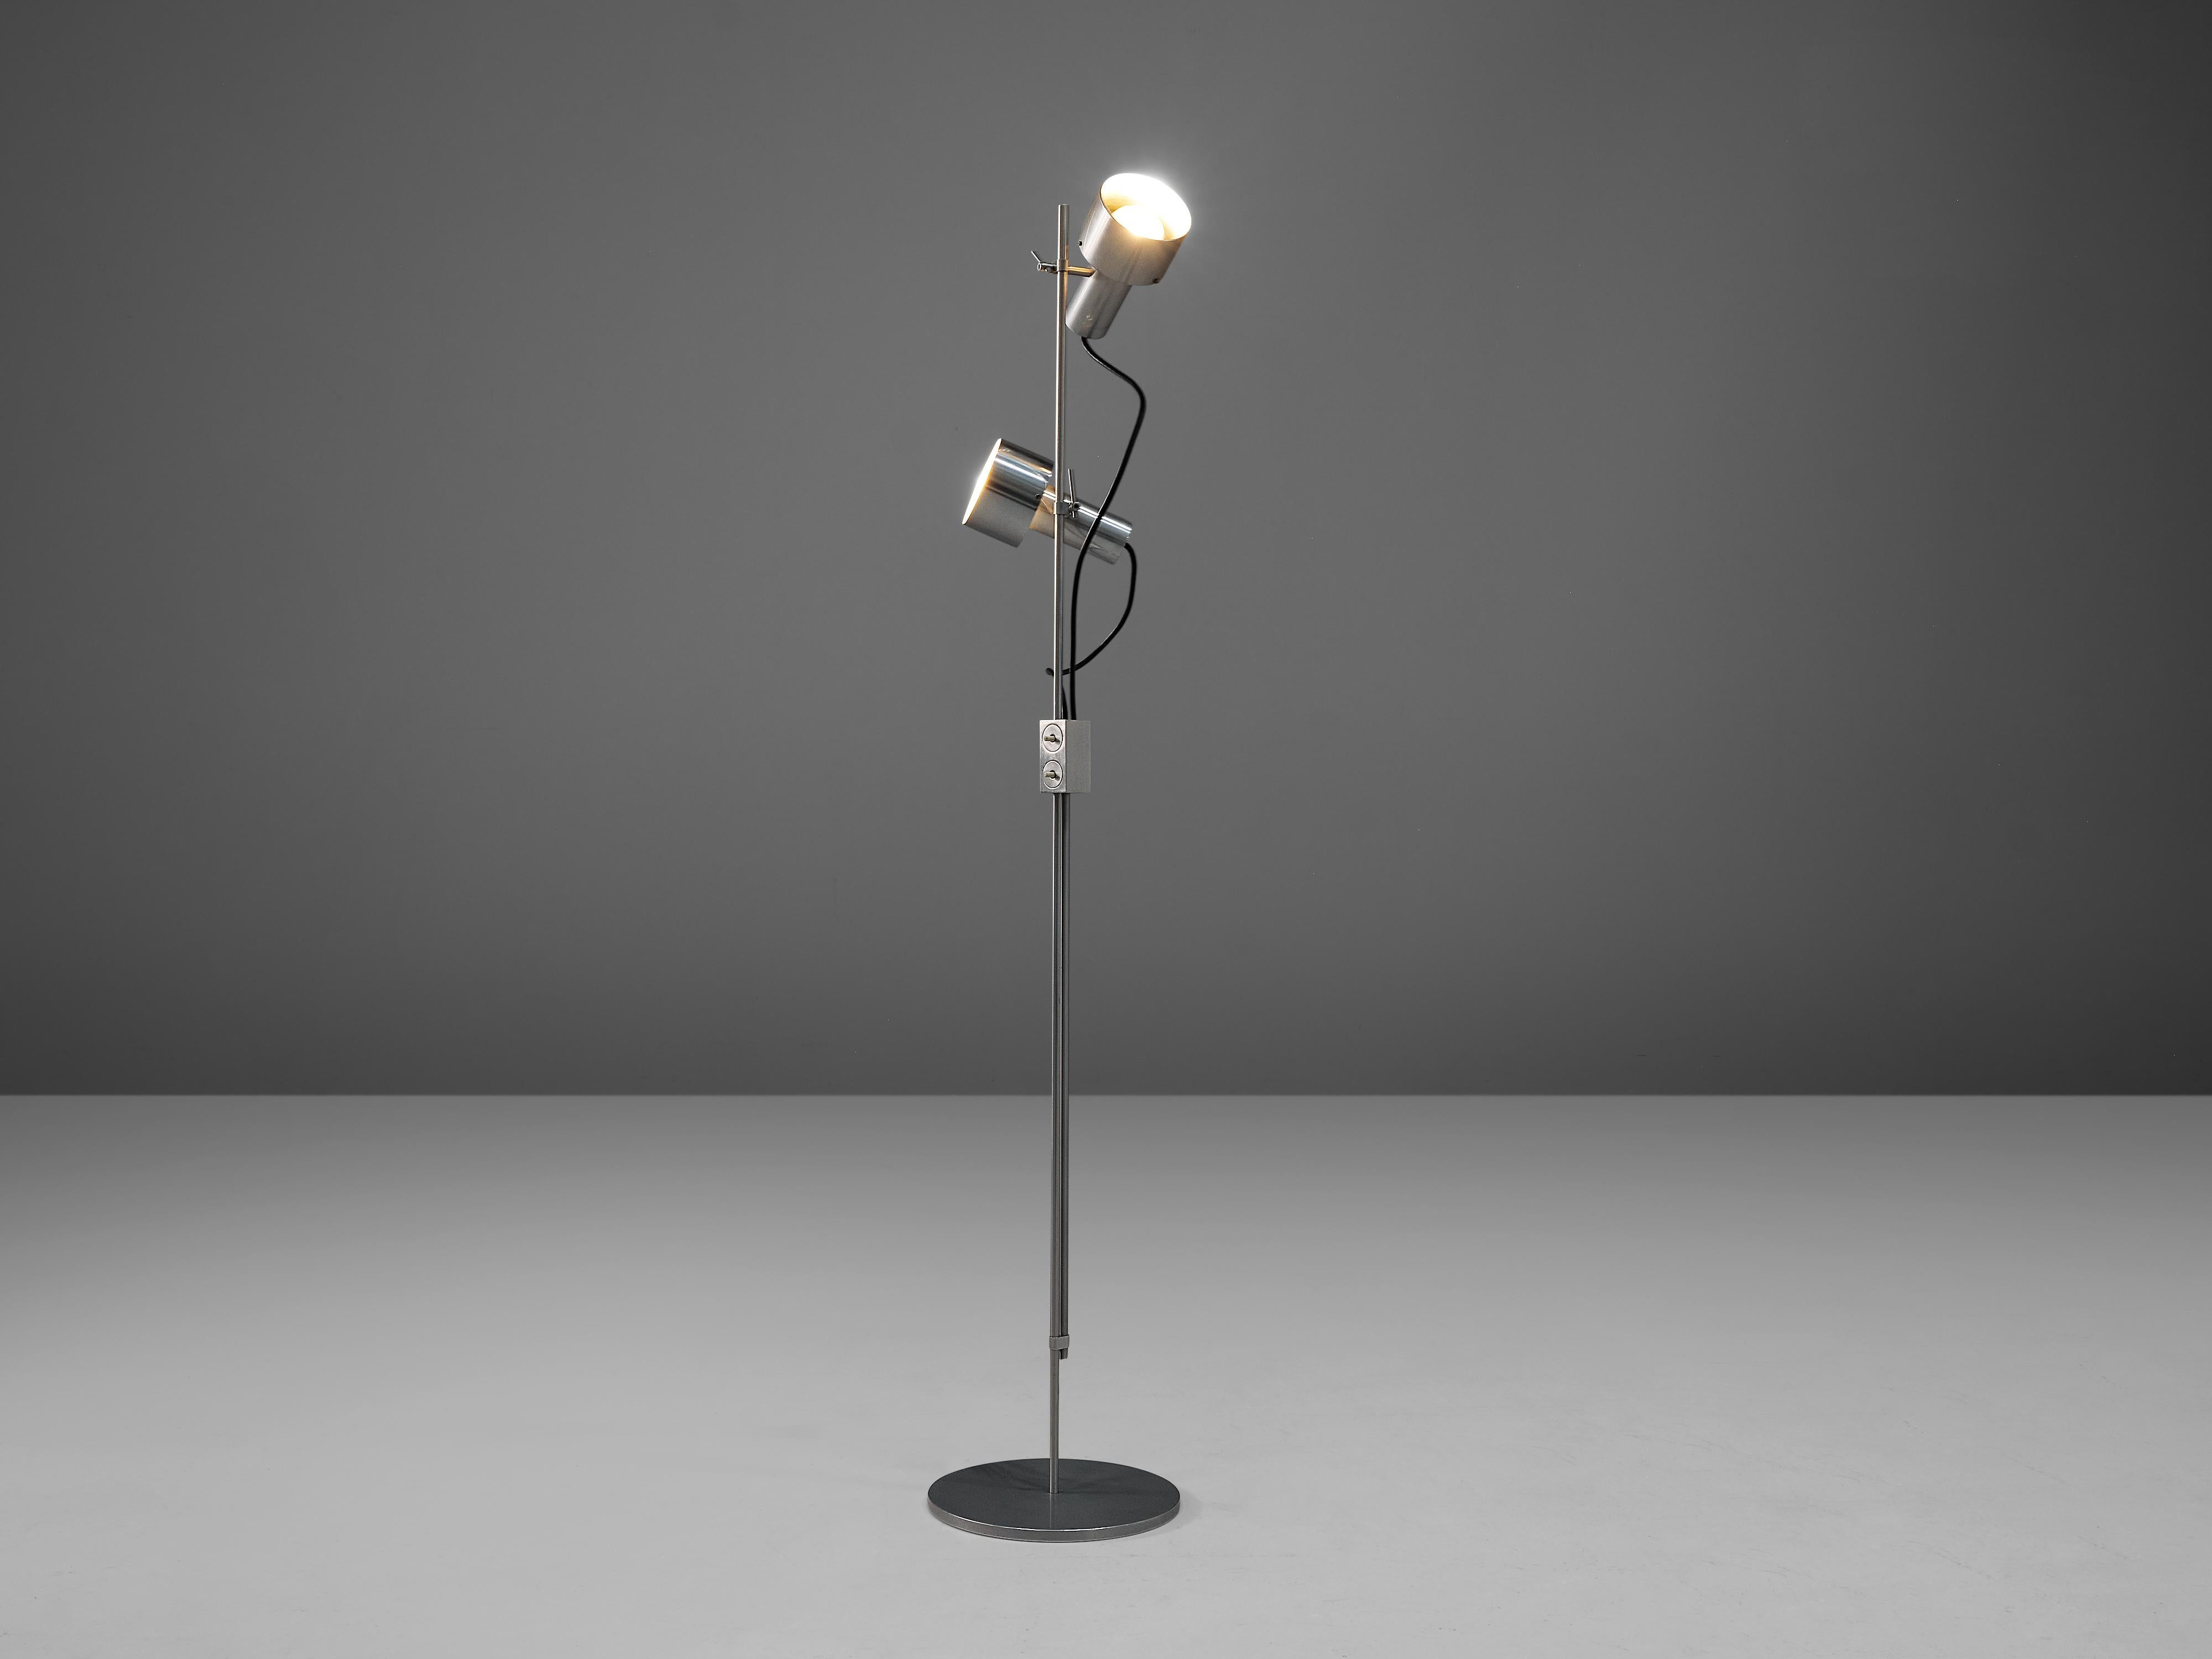 Peter Nelson for Architectural lighting, floor lamp, aluminum, United Kingdom, 1970s

These floor lamps are designed by Peter Nelson and manufactured by Architectural Lighting. They are an engineered piece executed in aluminum and therefore give